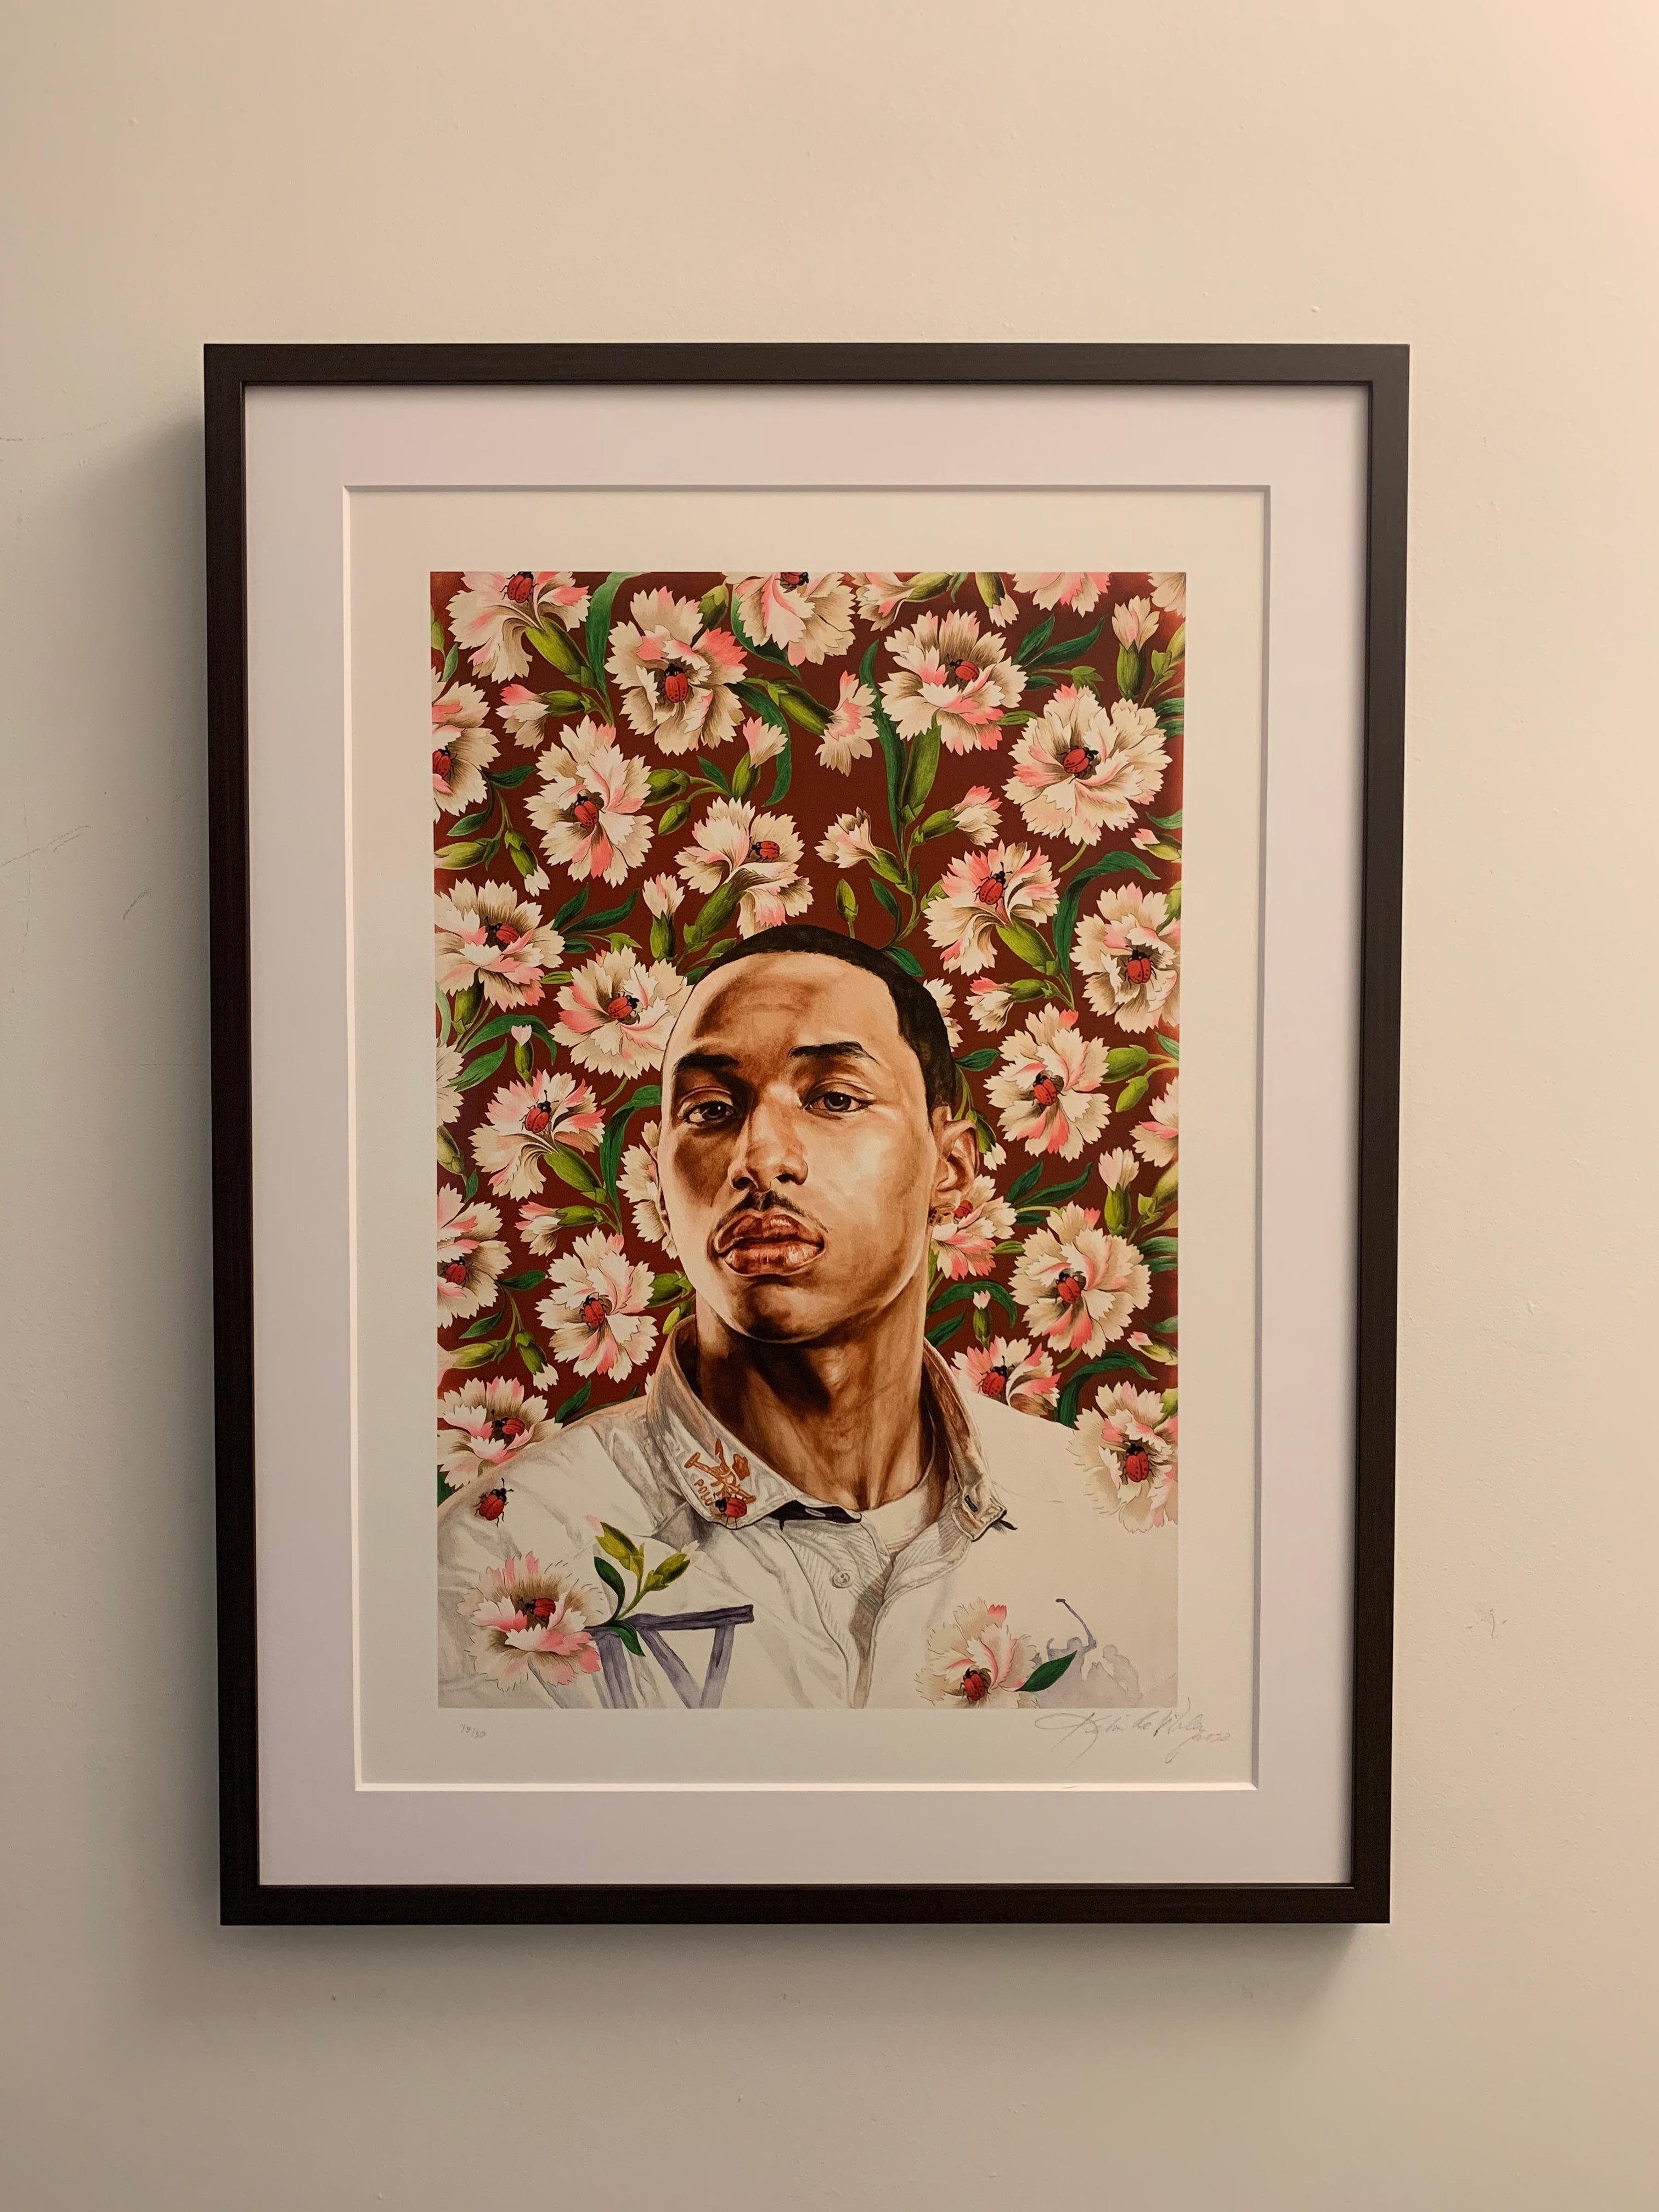 Kehinde Wiley 'Sharrod Hosten Study III' Signed Archival Pigment Print 2020 For Sale 2